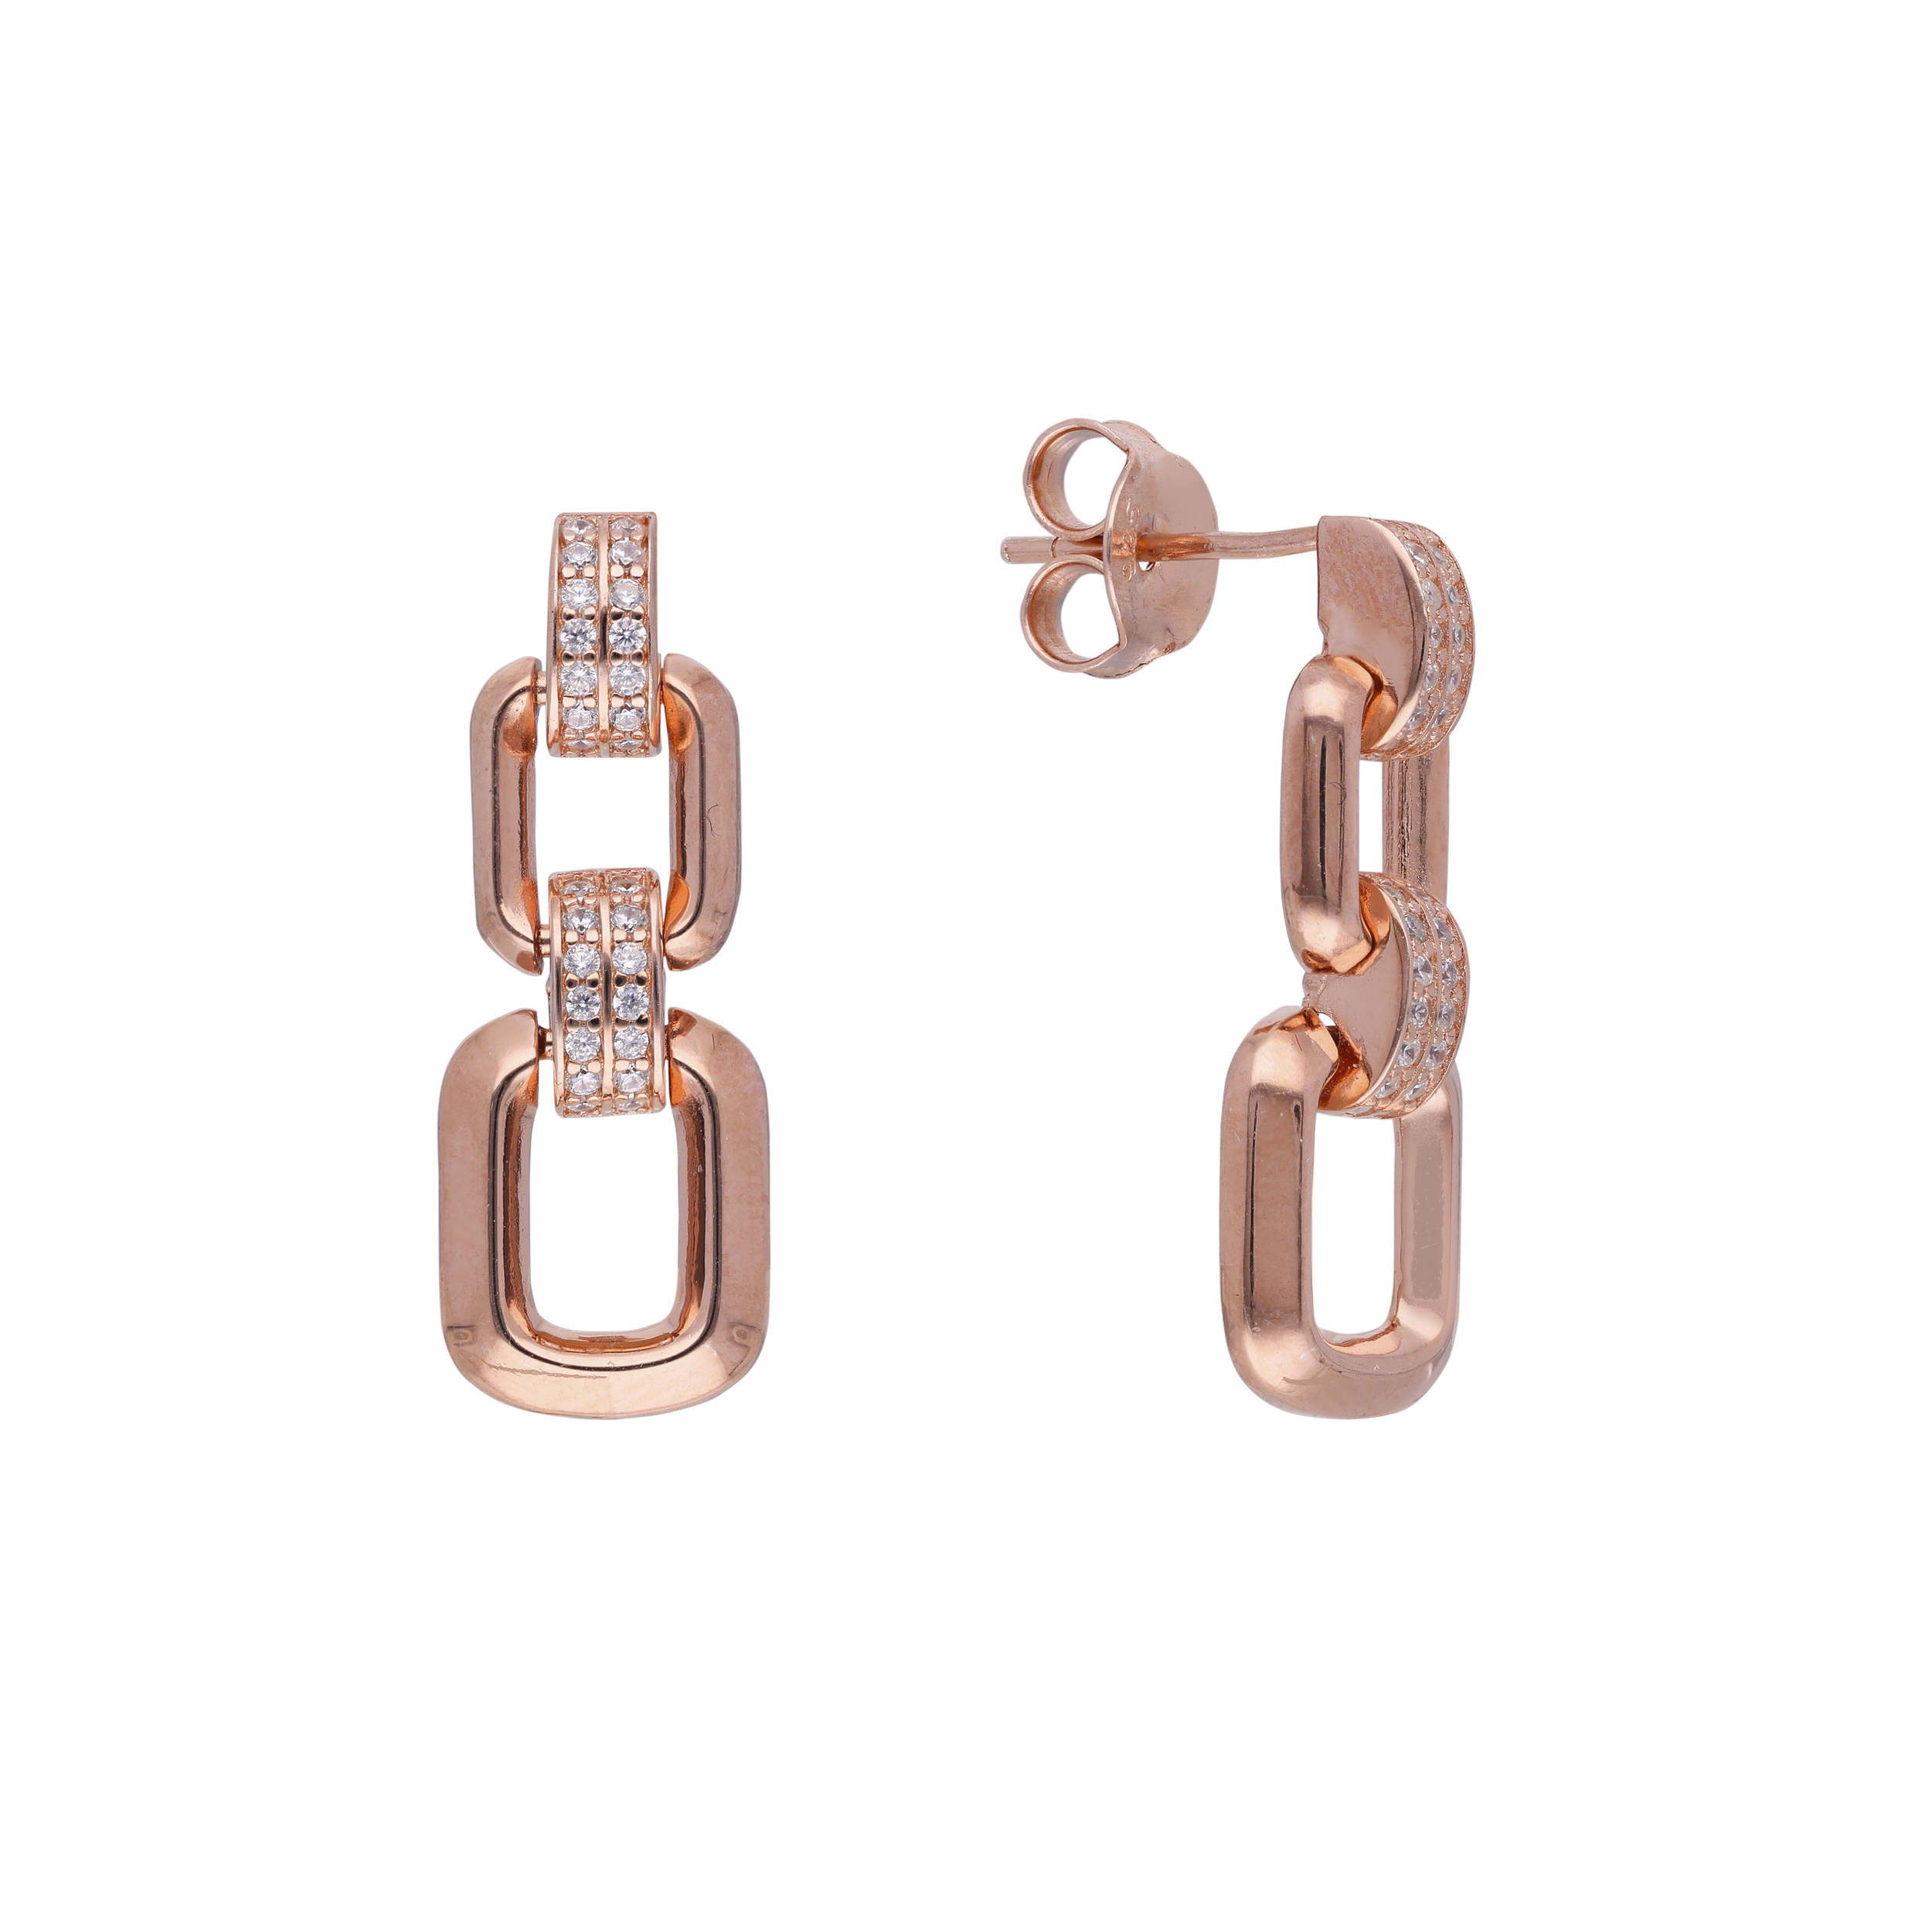 Chic Interlinked Rectangle Rose Gold Eardrops with Cubic Zirconia Accents | SKU : 0019889016, 0019889030, 0003111949 , 0003112007, 0003111963